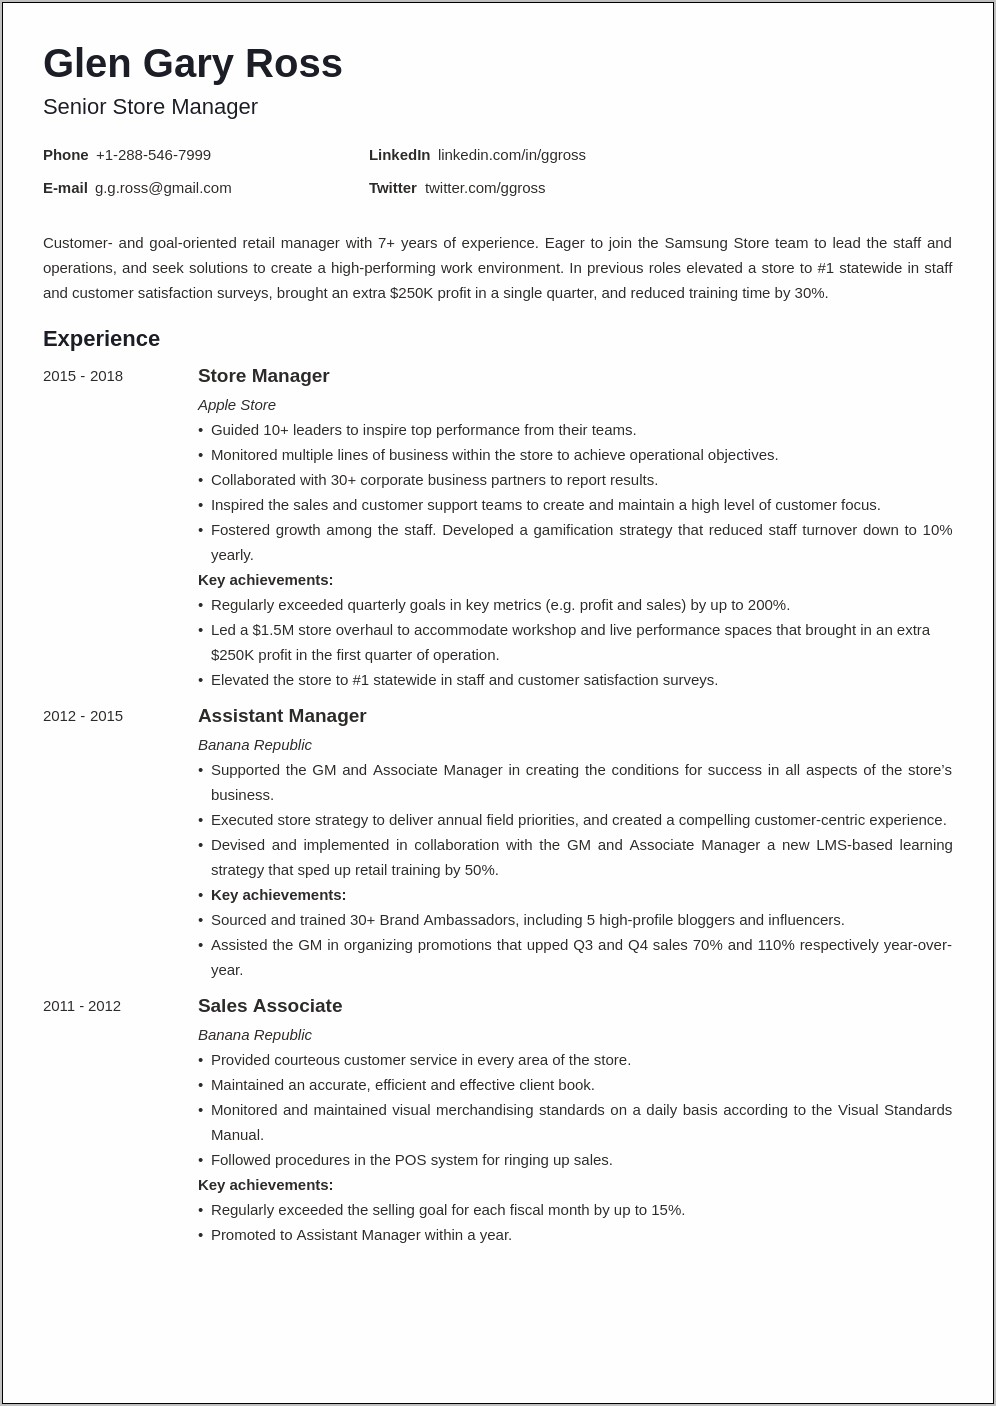 Resume Objective Ideas For Retail